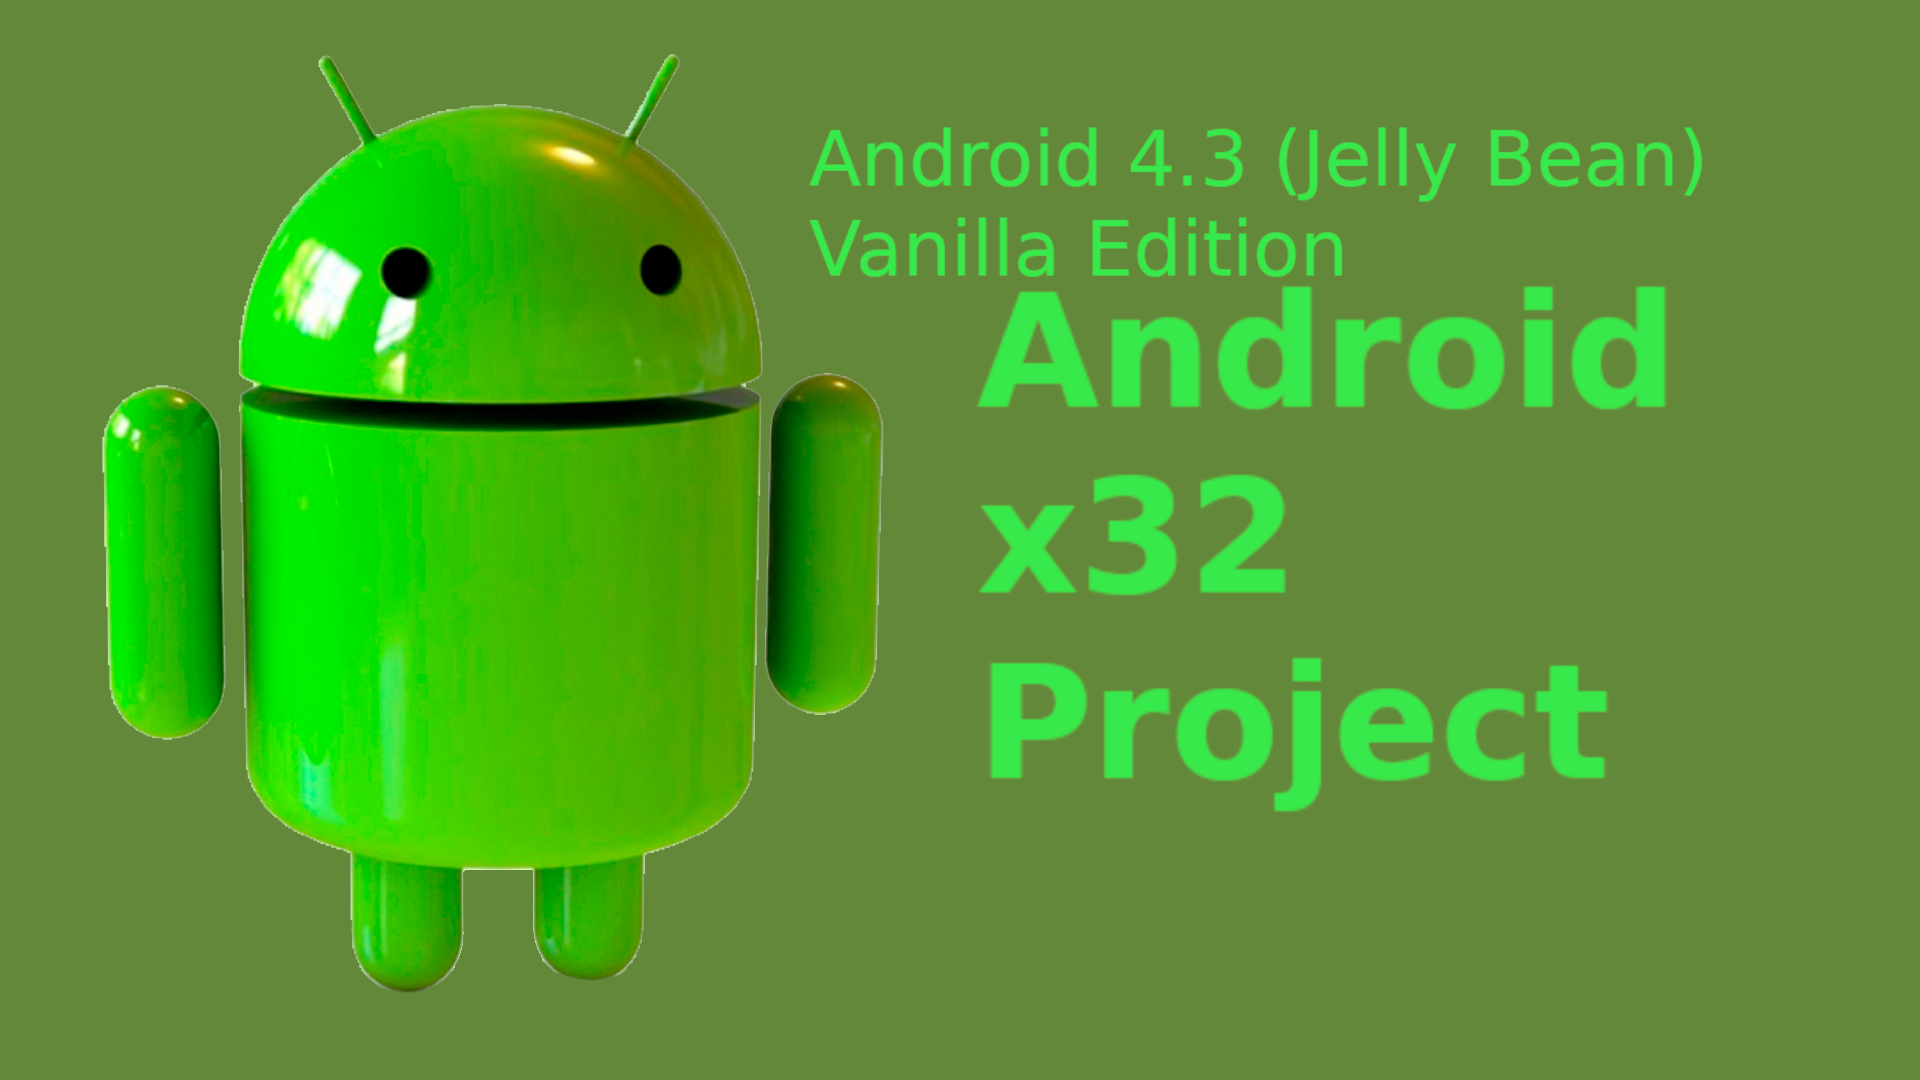 Android-x32_Android4.3_Vanilla_Edition